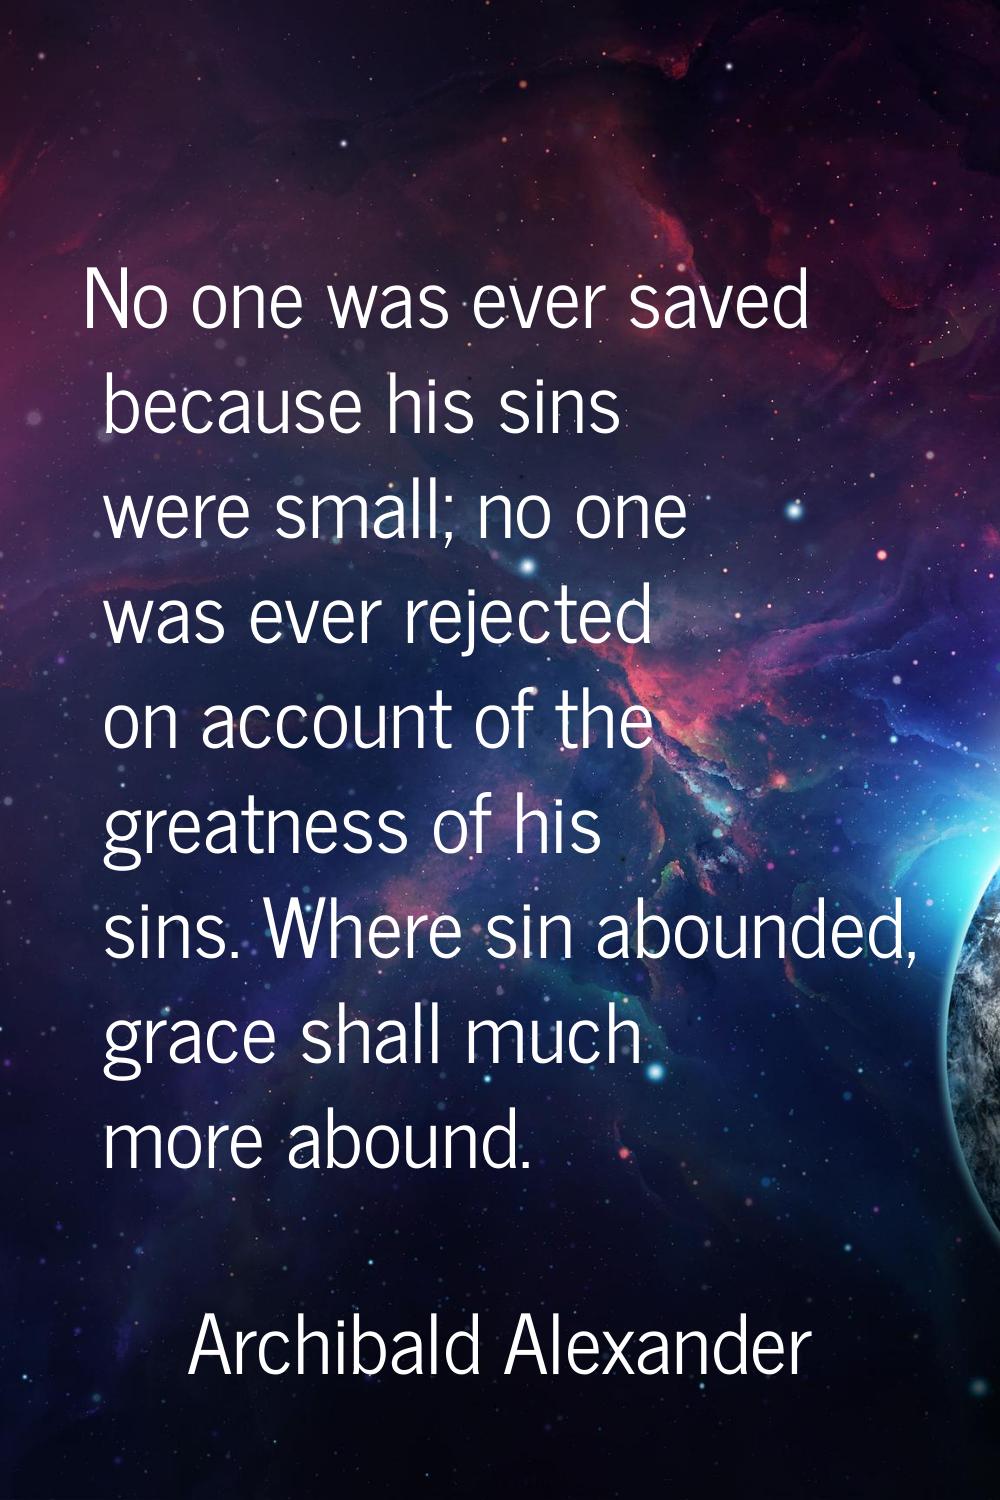 No one was ever saved because his sins were small; no one was ever rejected on account of the great